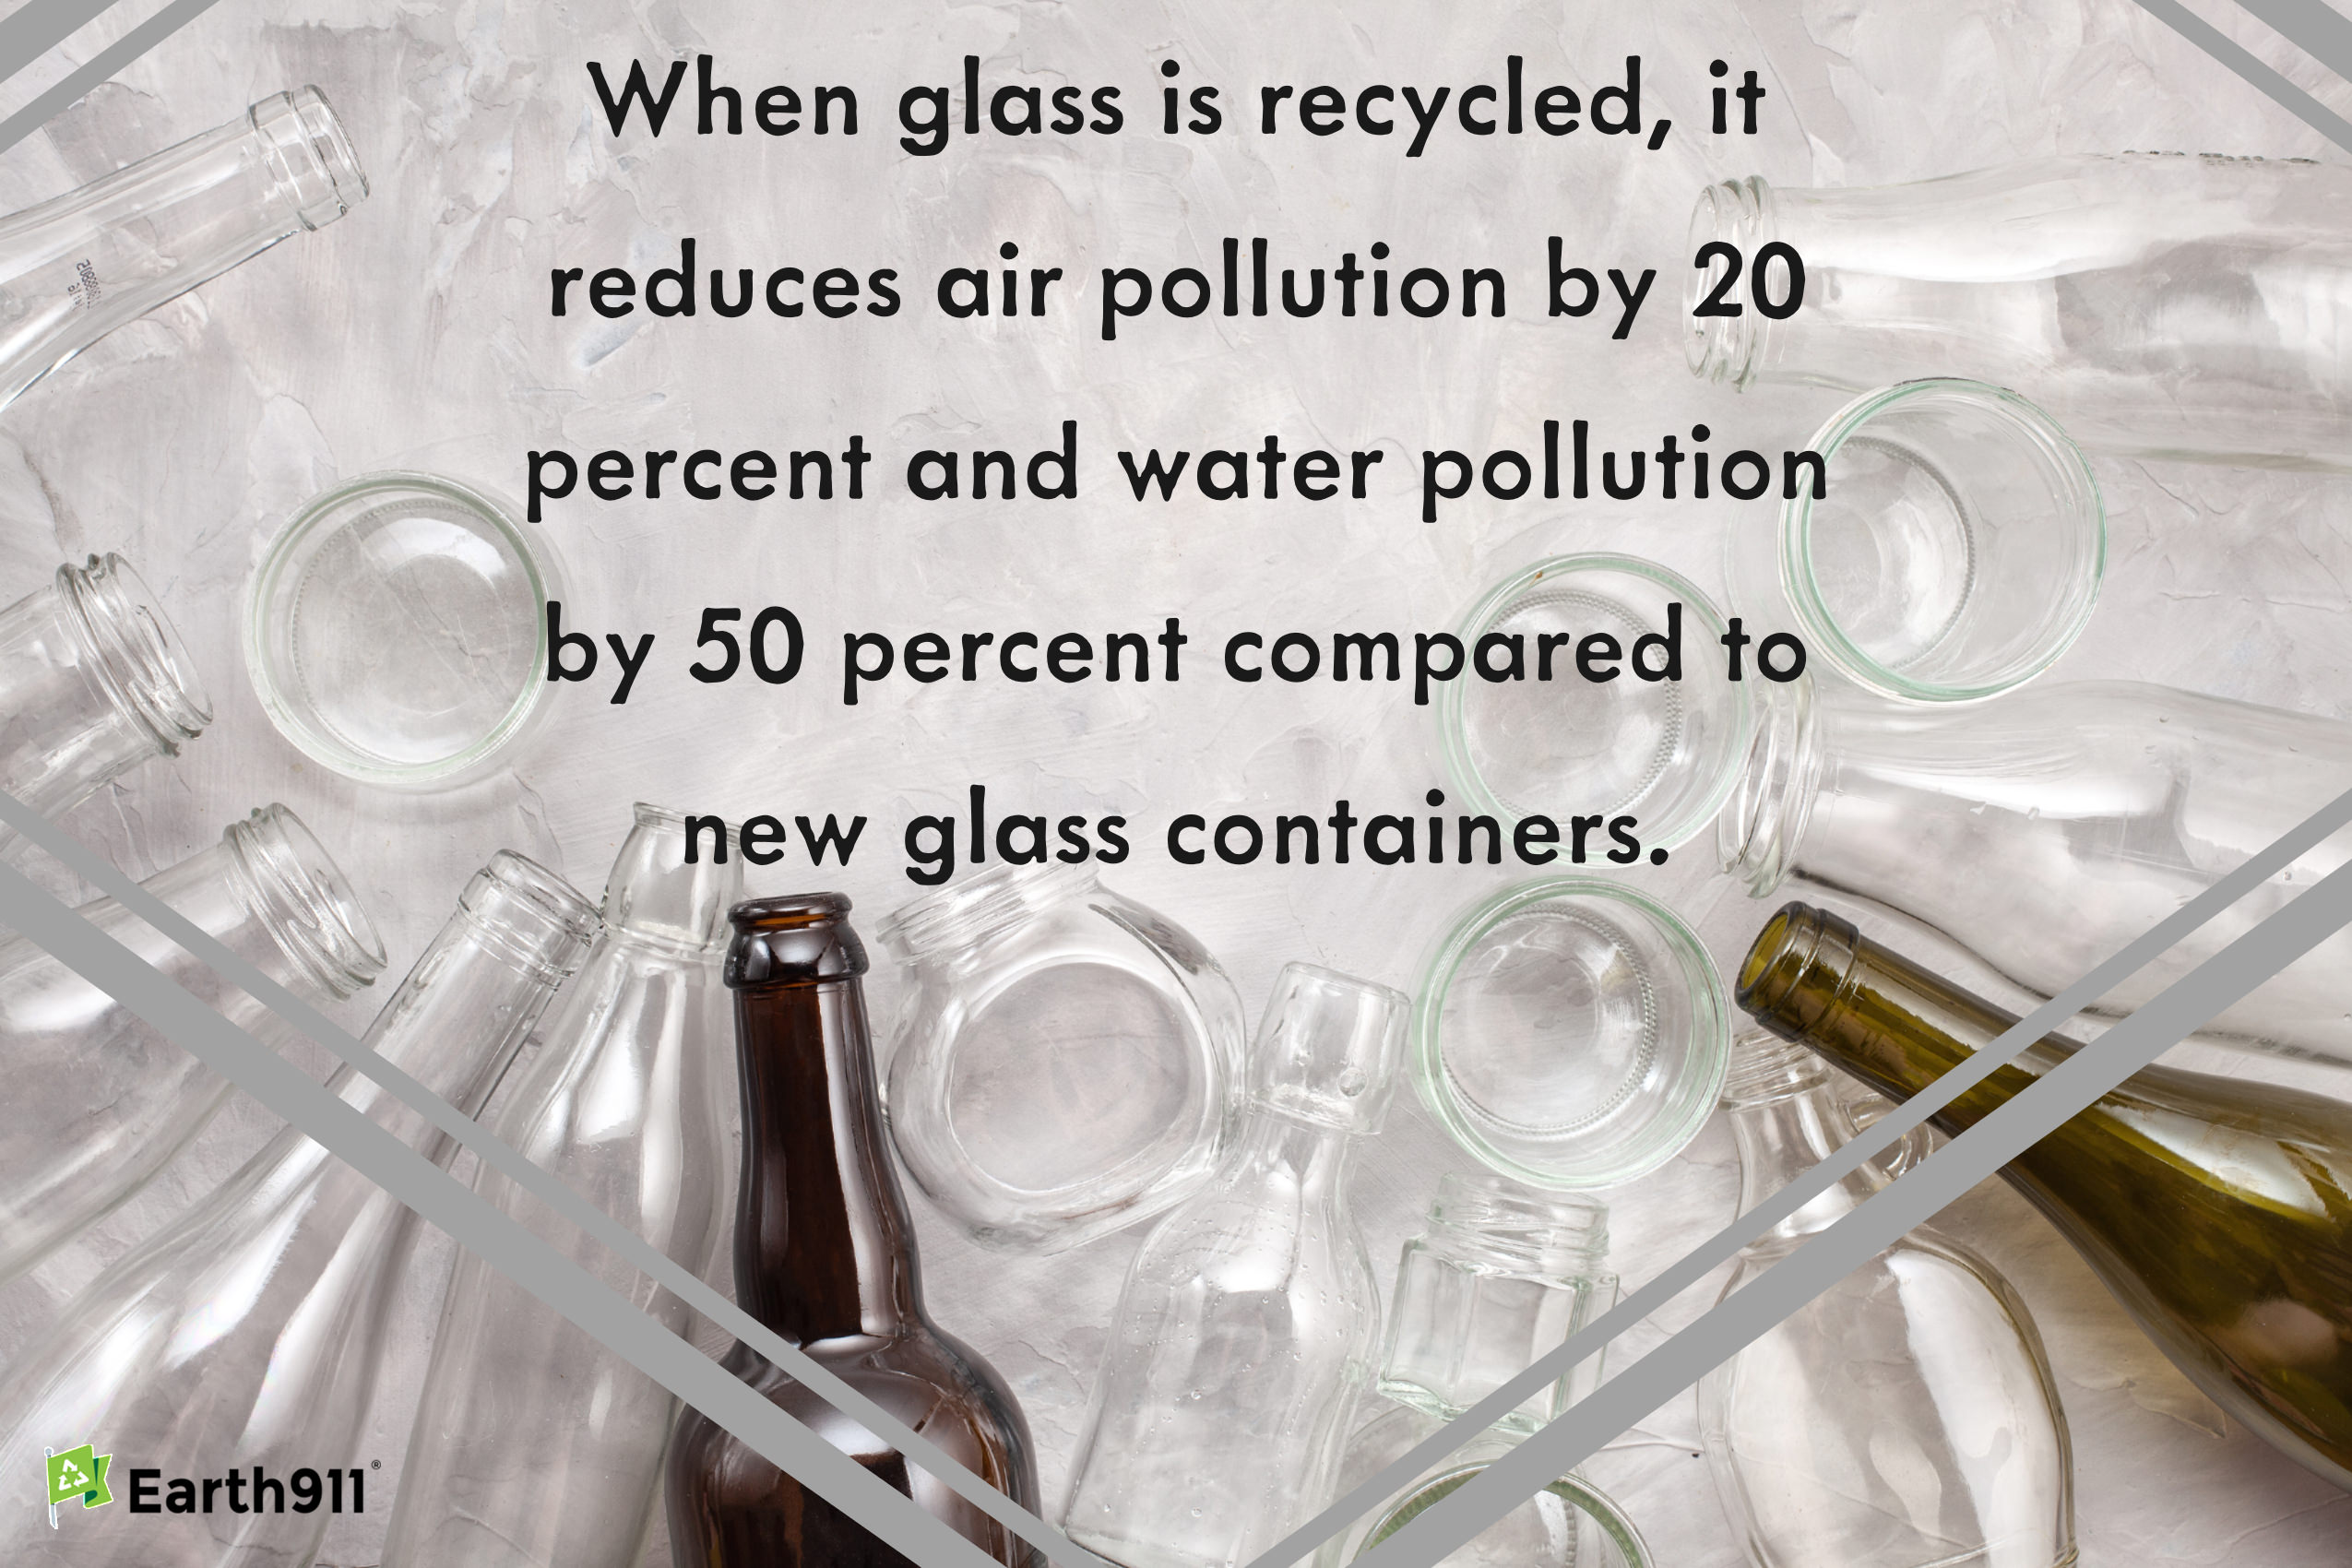 We Earthlings Glass Recycling Helps the Environment  Earth911